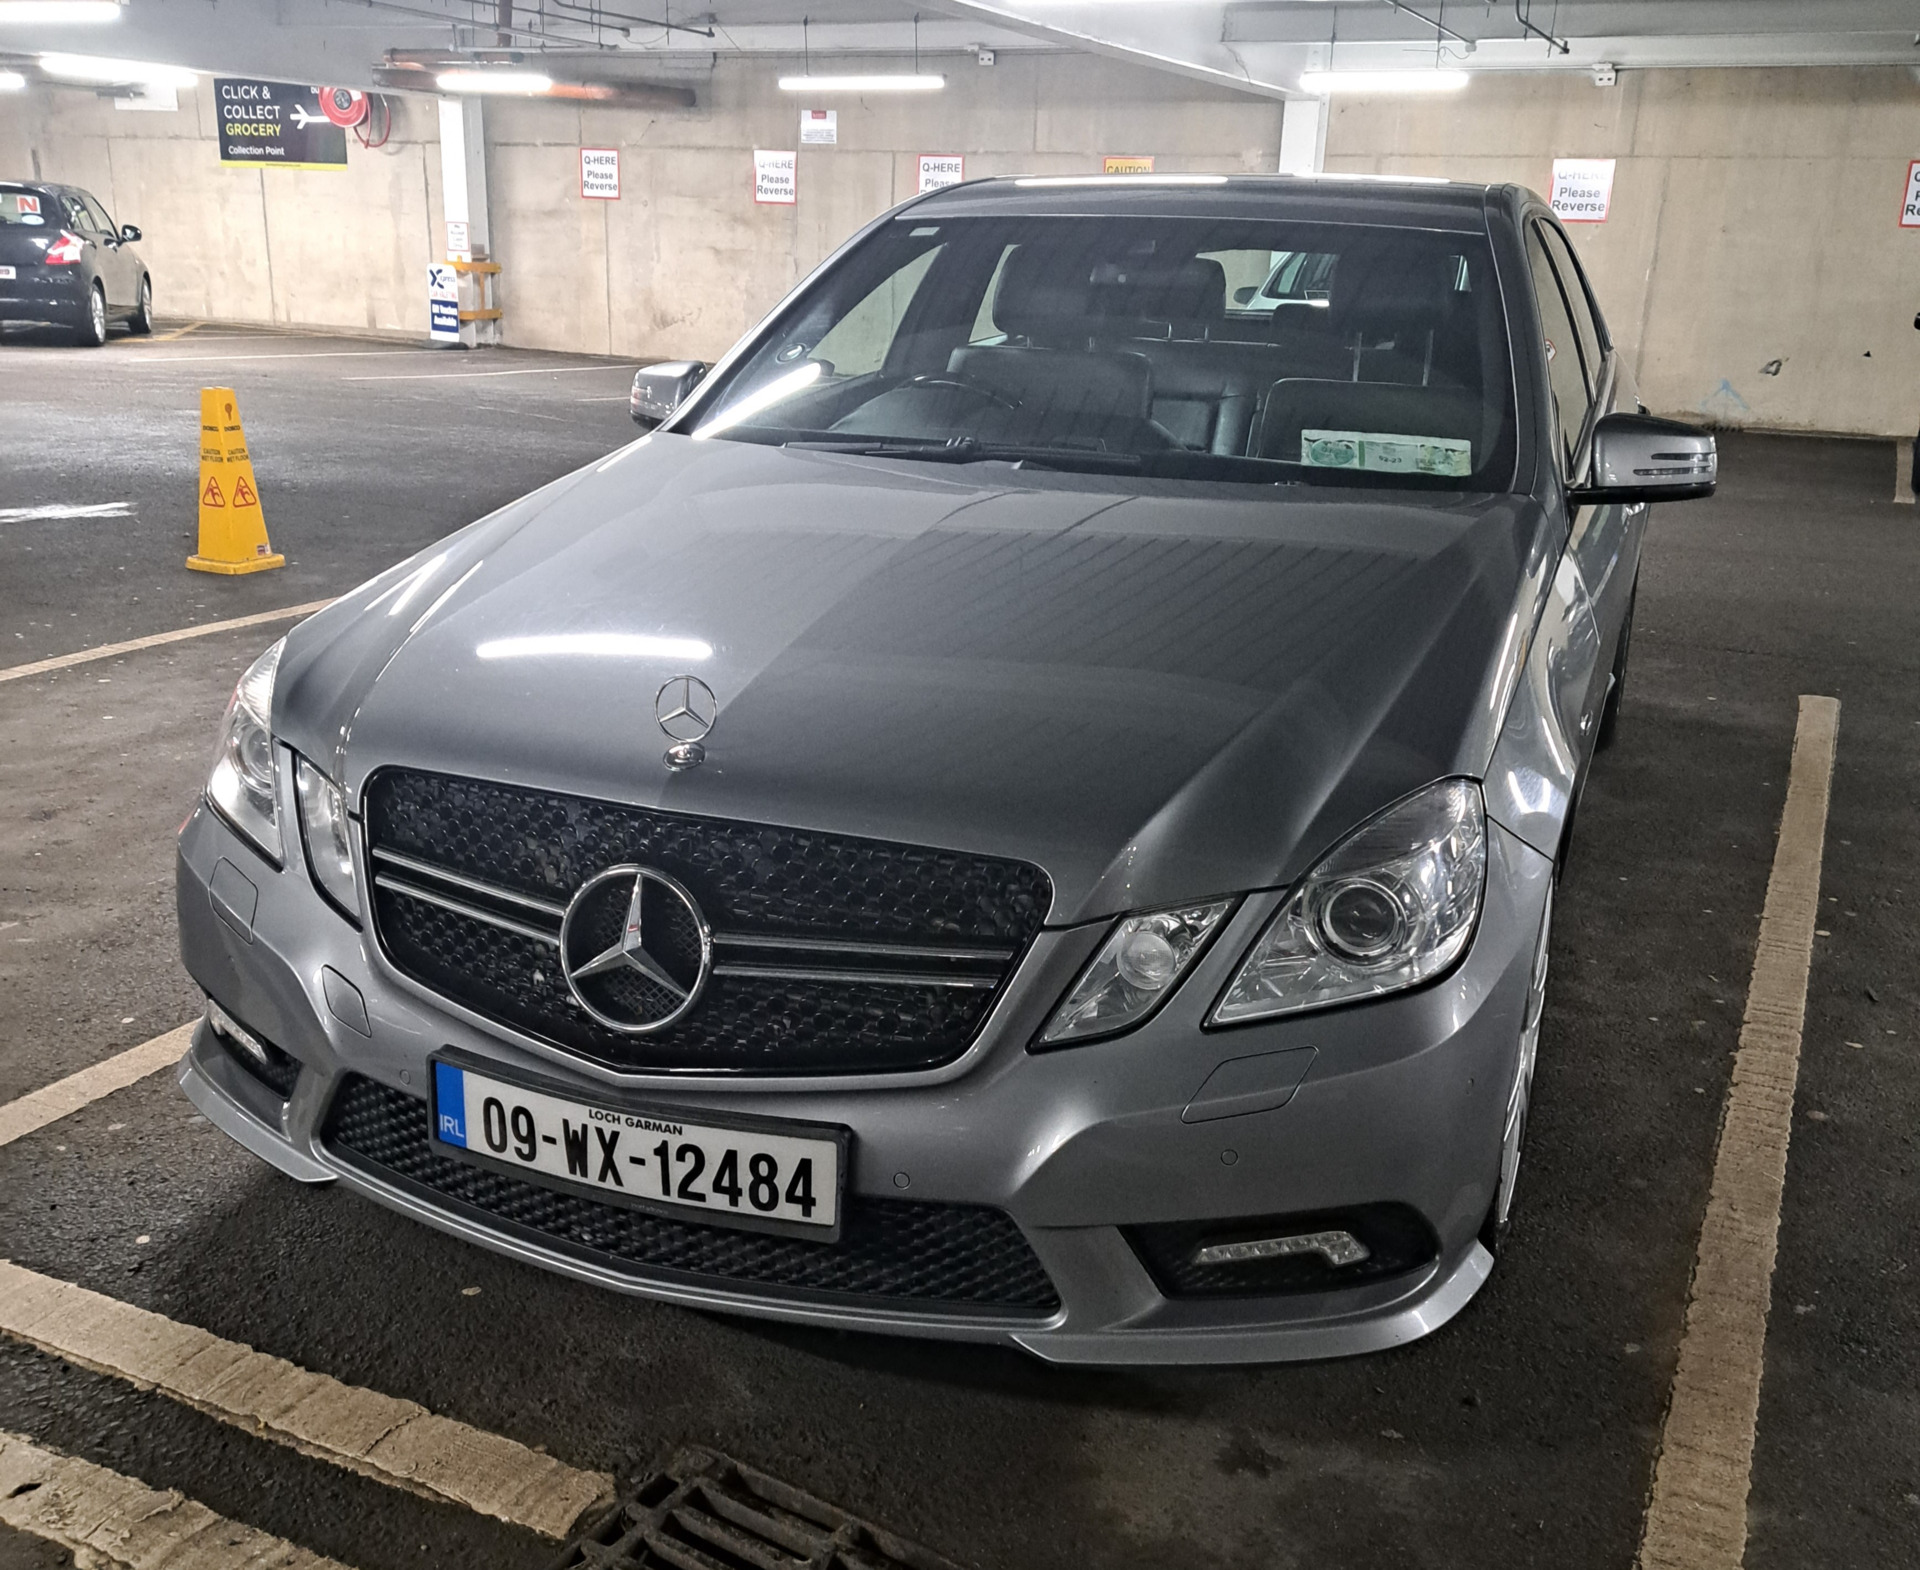 Used Mercedes-Benz E-Class 2009 in Wexford